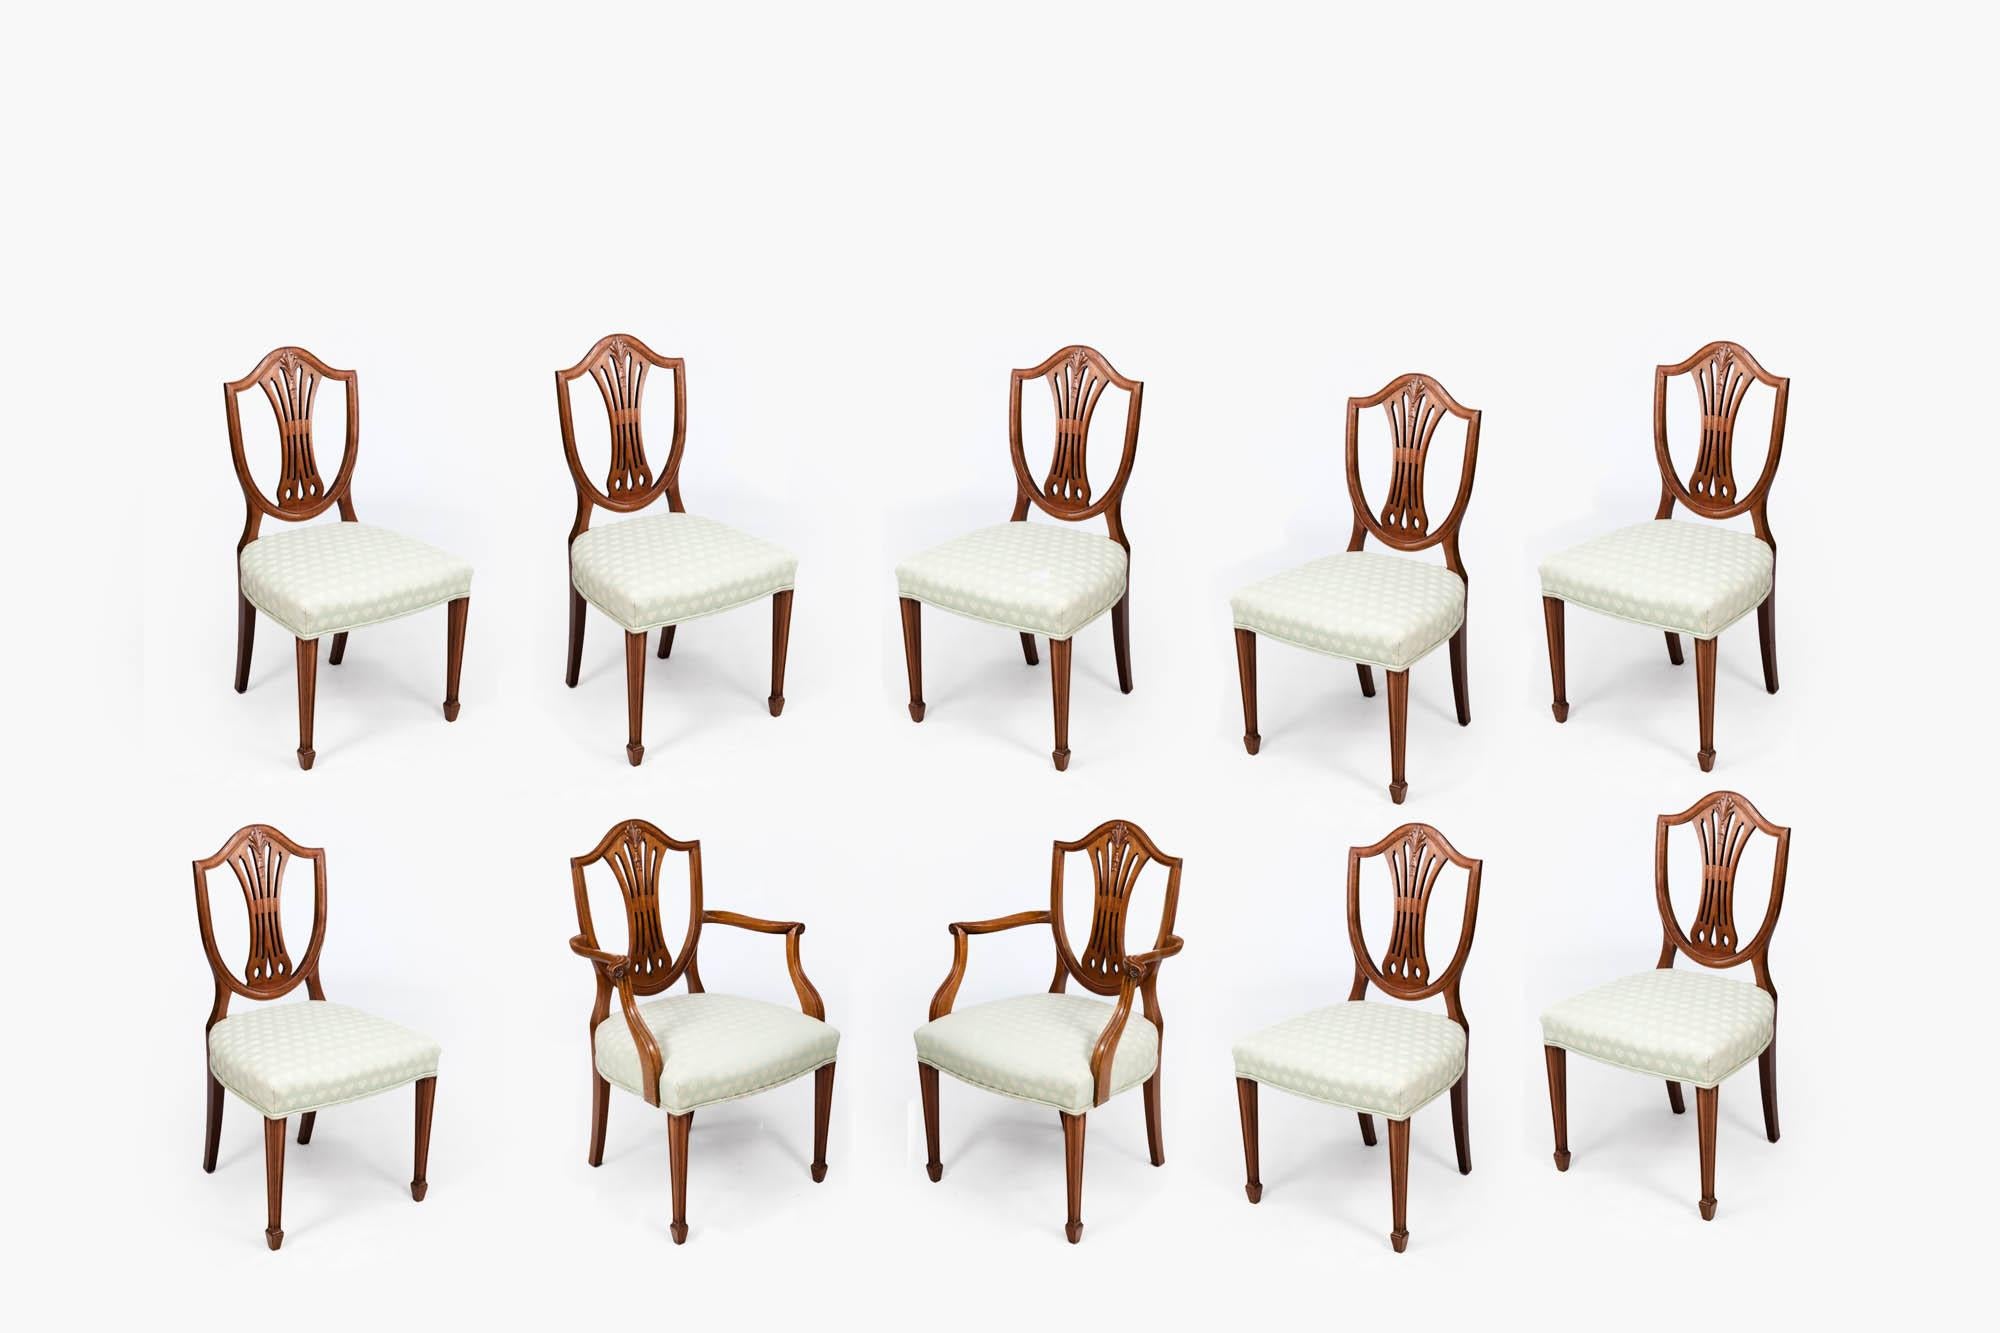 19th century set of ten shield-back dining chairs (eight + two carvers). In the elegant style of Hepplewhite. The 'Hepplewhite' chair is a highly distinctive style of light, elegant furniture that was highly fashionable between 1775 - 1800.